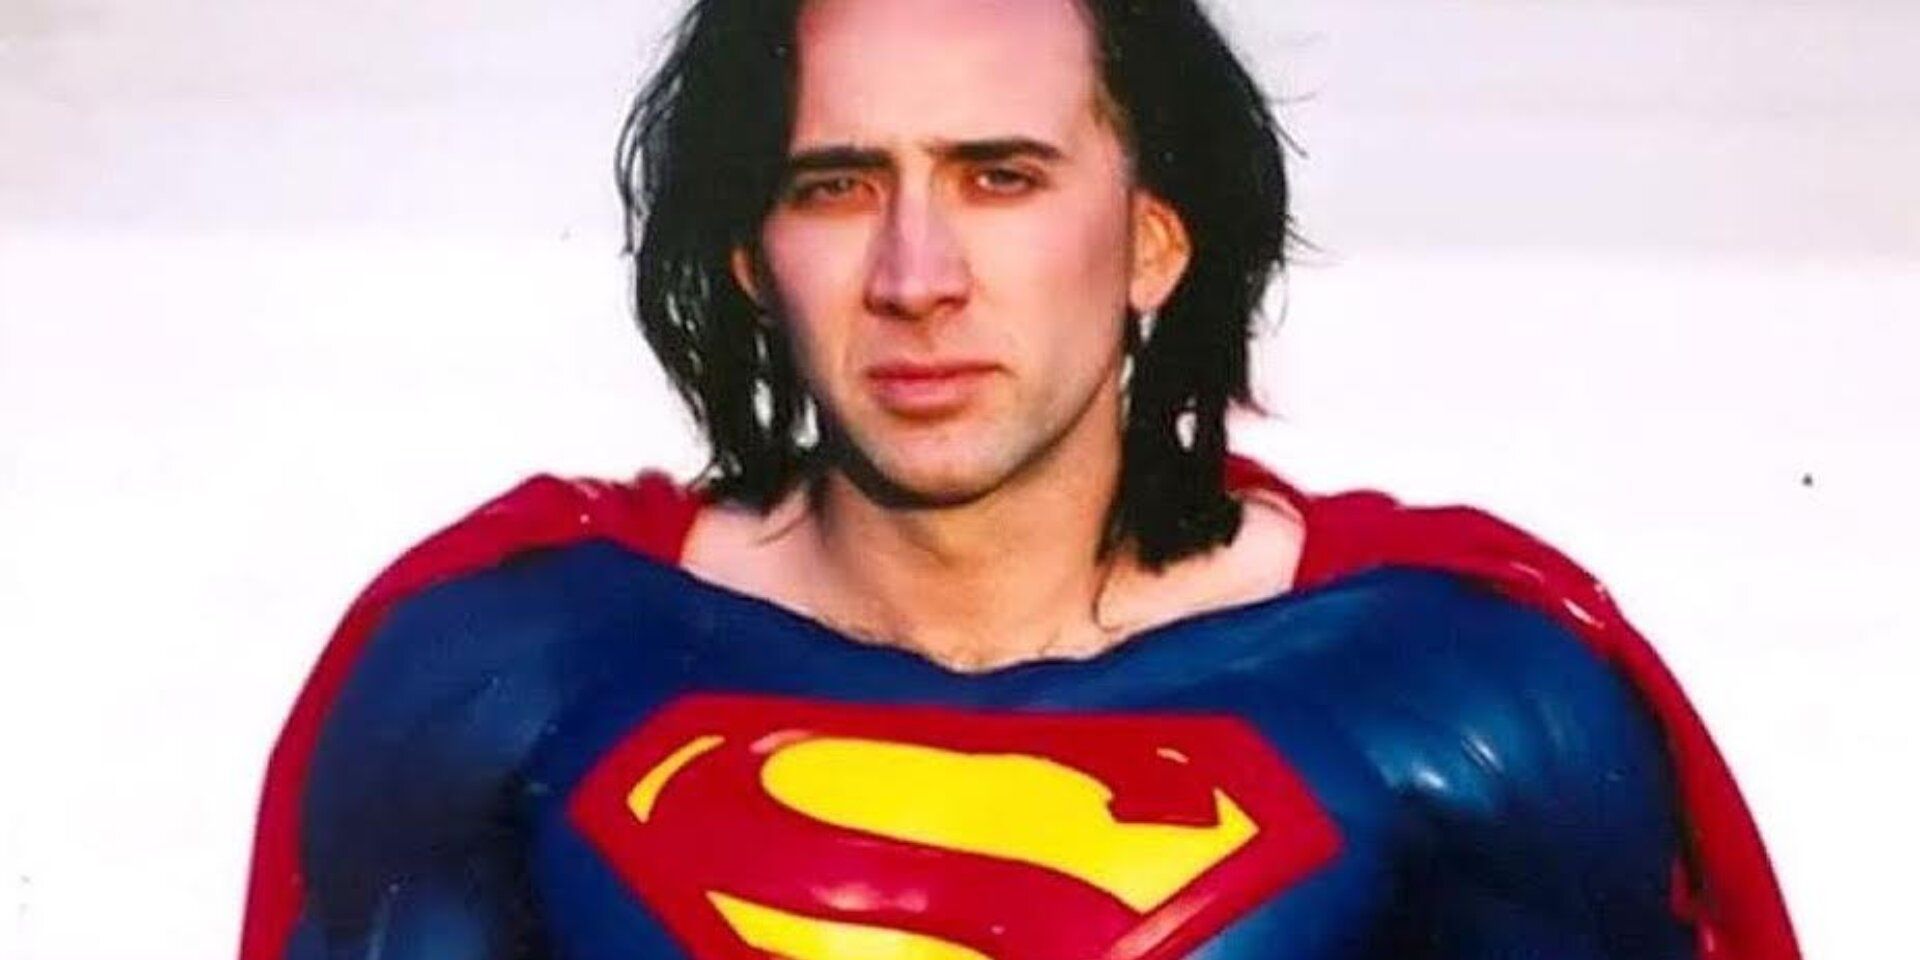 Nicolas Cage as Superman in a Superman Lives costume test photo.